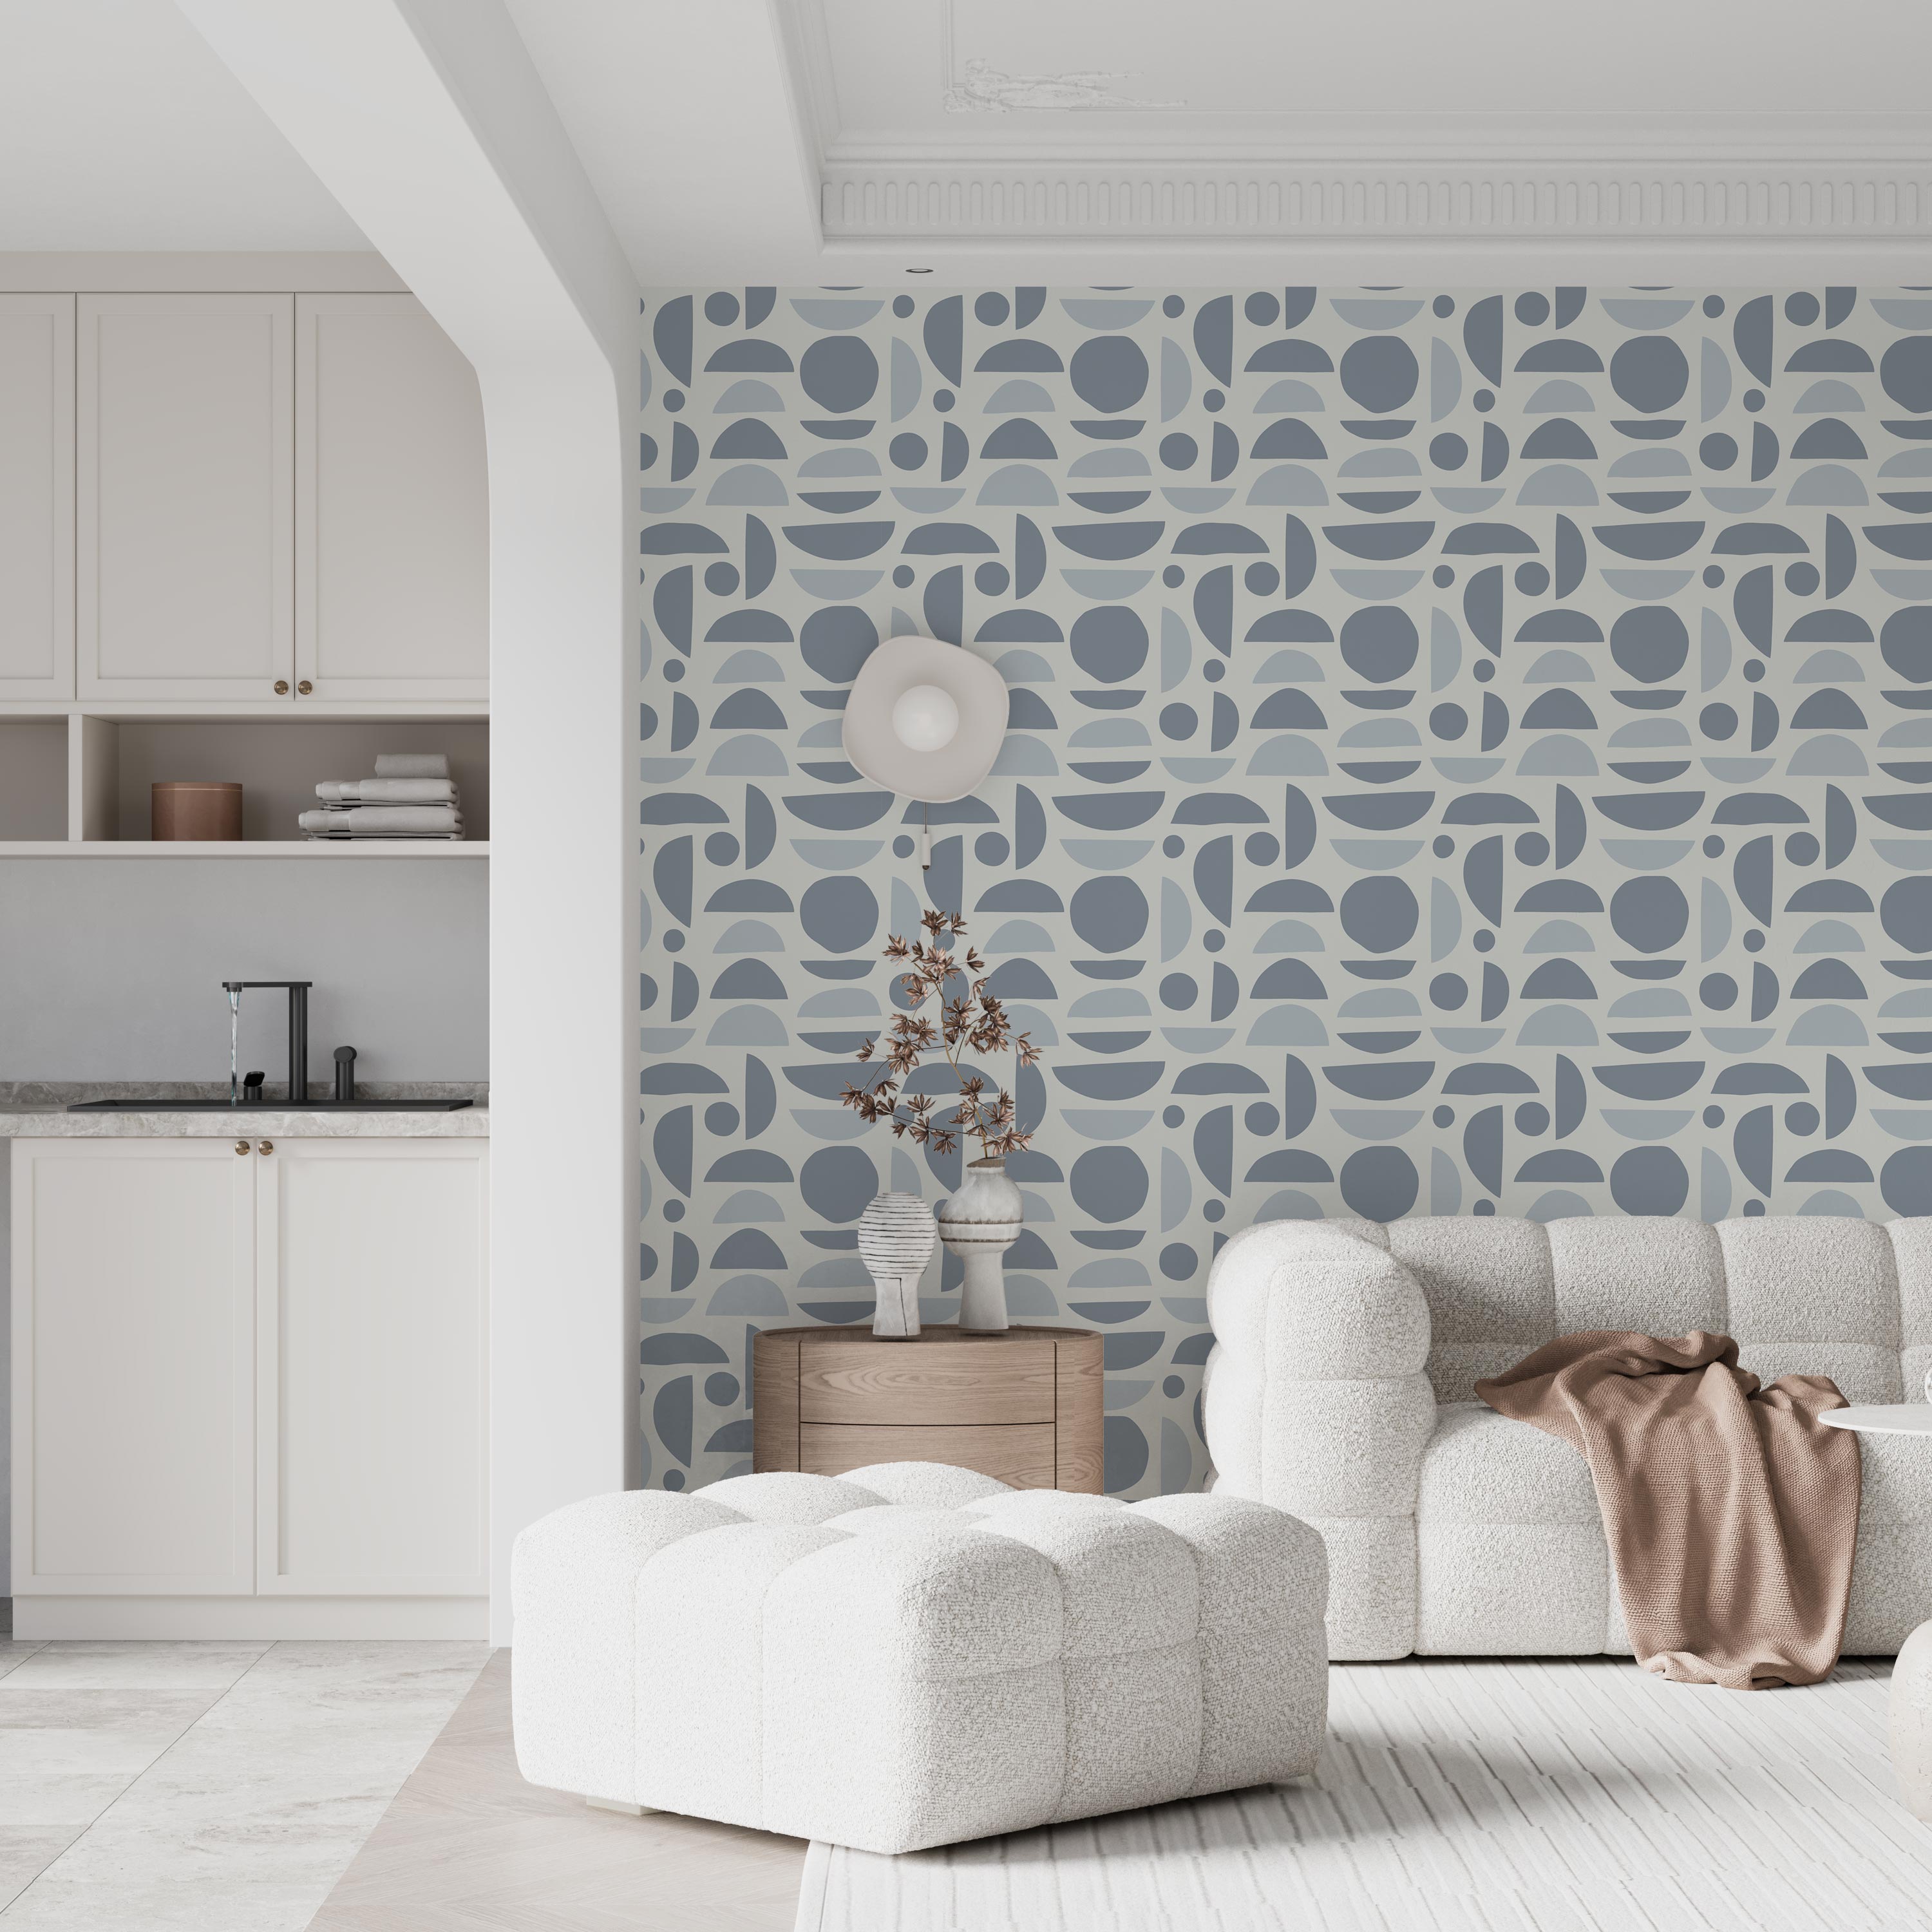 files/A-sophisticated-living-room-adorned-with-classic-blue-peel-and-stick-wallpaper_-creating-a-tranquil-focal-point.-The-delicate-geometric-pattern-blends-harmoniously-with-the-room_s-dec.jpg